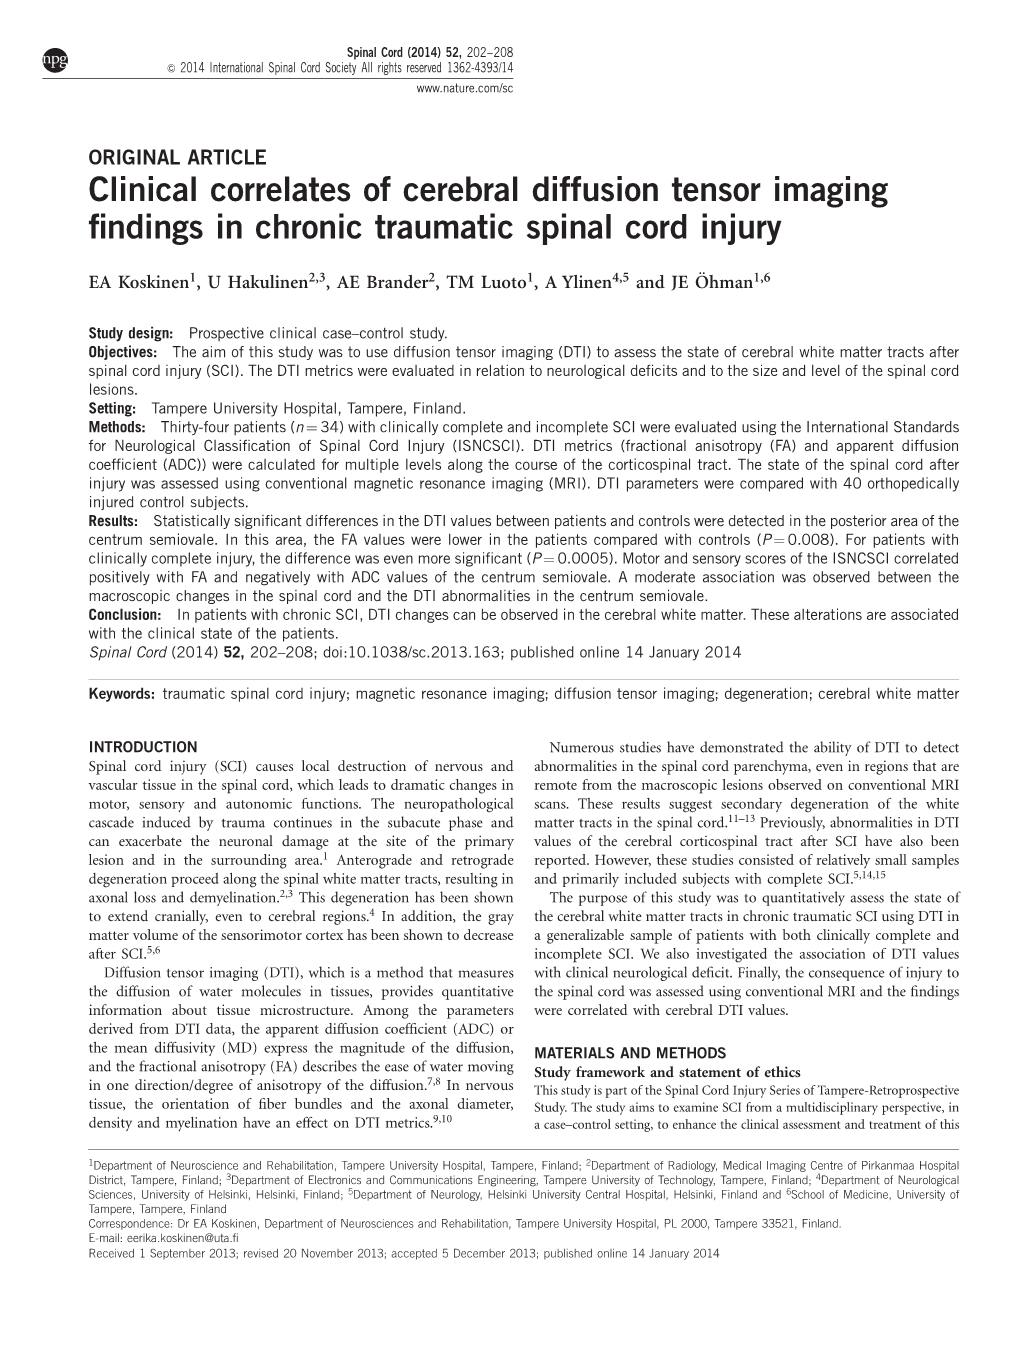 Clinical Correlates of Cerebral Diffusion Tensor Imaging Findings in Chronic